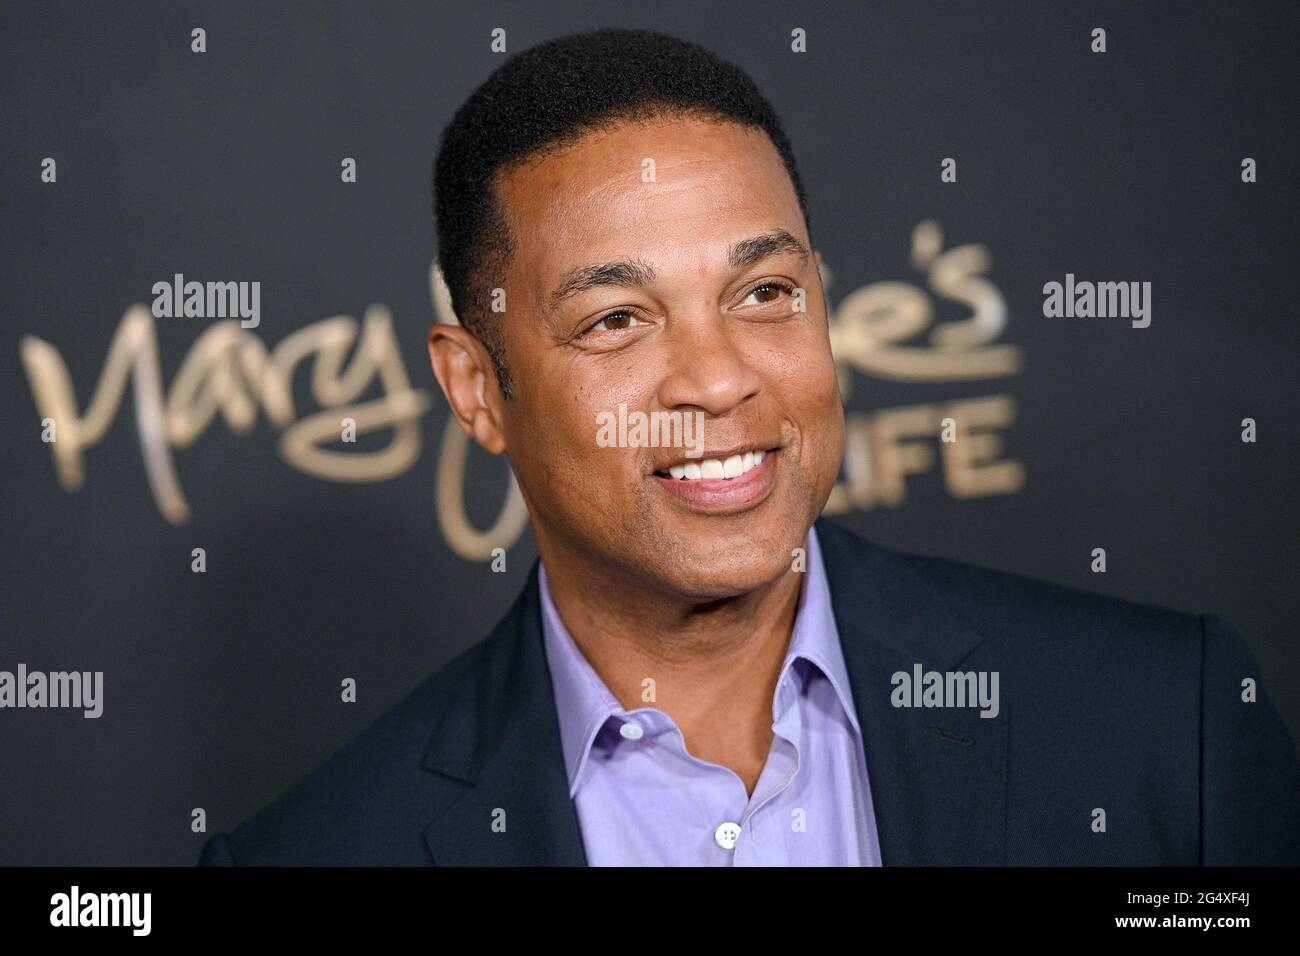 New York, USA. 23rd June, 2021. Don Lemon attends “Mary J. Blige's My Life” premiere at the Rose Theater - Jazz at Lincoln Center, New York, NY, June 23, 2021. (Photo by Anthony Behar/Sipa USA) Credit: Sipa USA/Alamy Live News Stock Photo